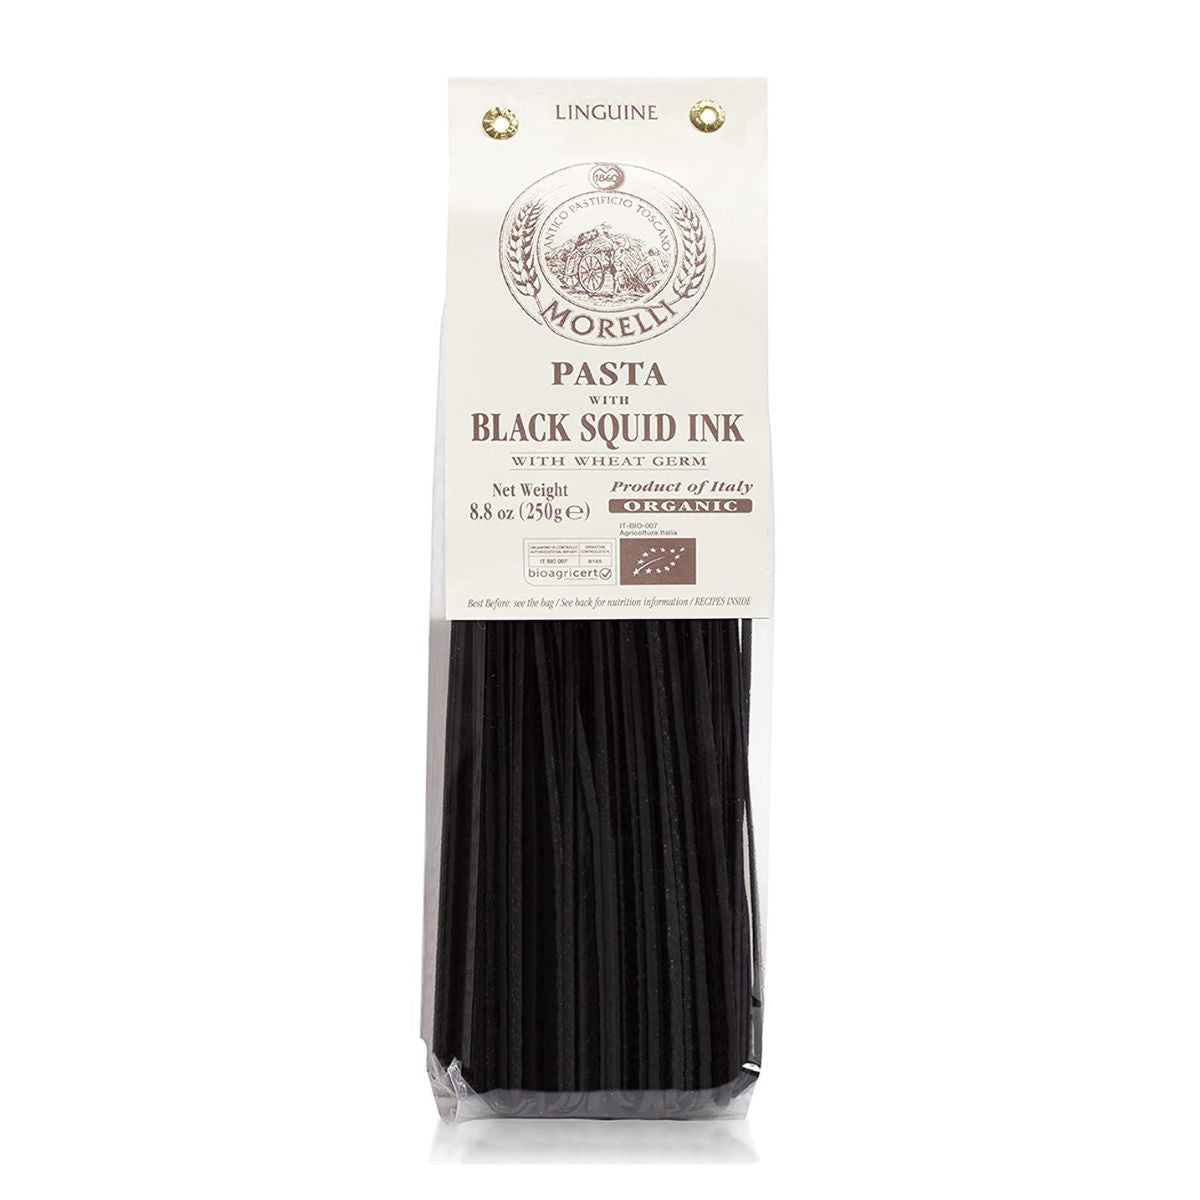 Organic Linguine with Black Squid Ink- Perfect to serve with seafood